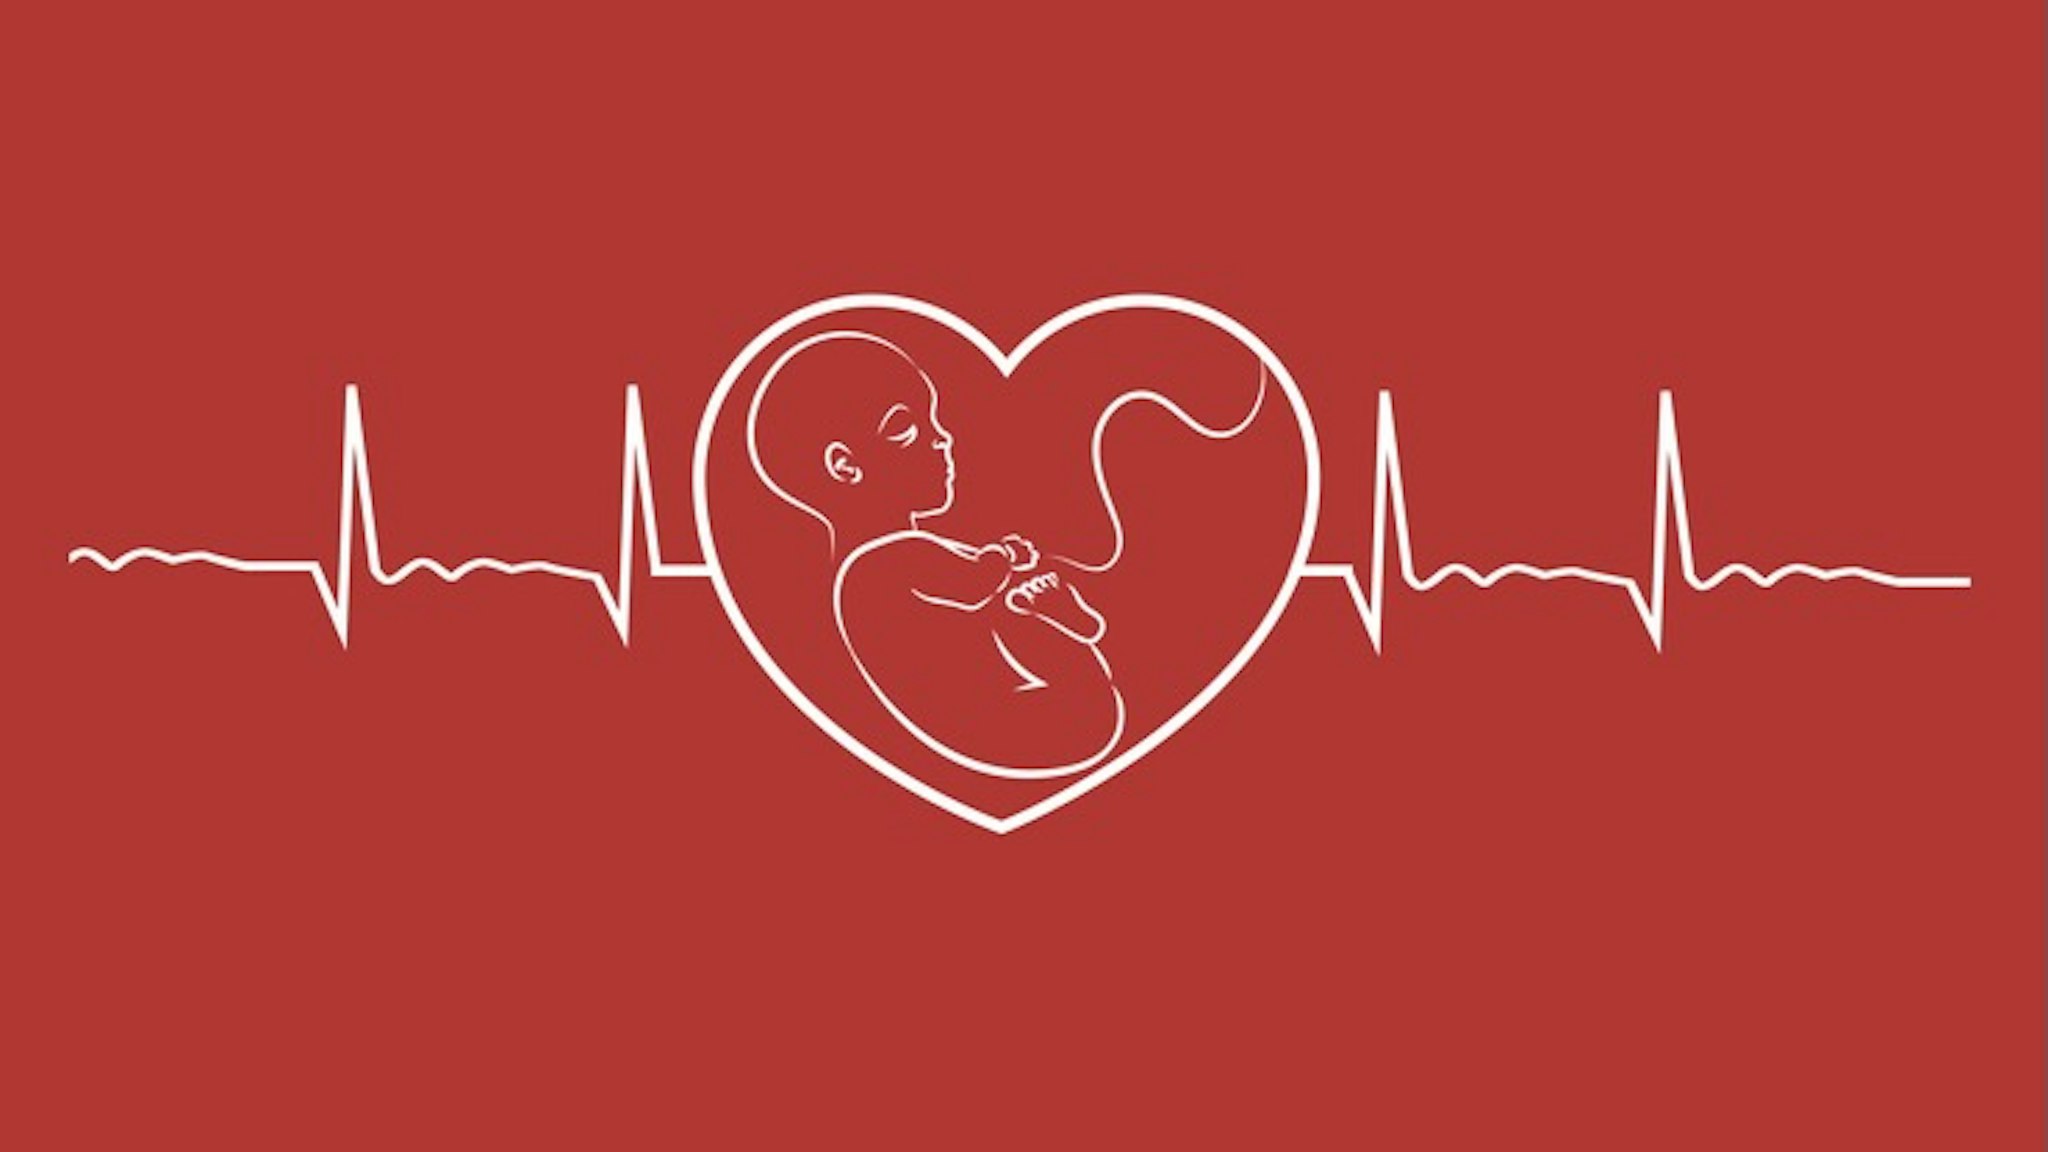 Baby on heart concept linear design vector. Heart beat graph of a pregnant woman. - stock vector Baby on heart concept linear design vector. Heart beat graph of a pregnant woman. CarlaNichiata via Getty Images